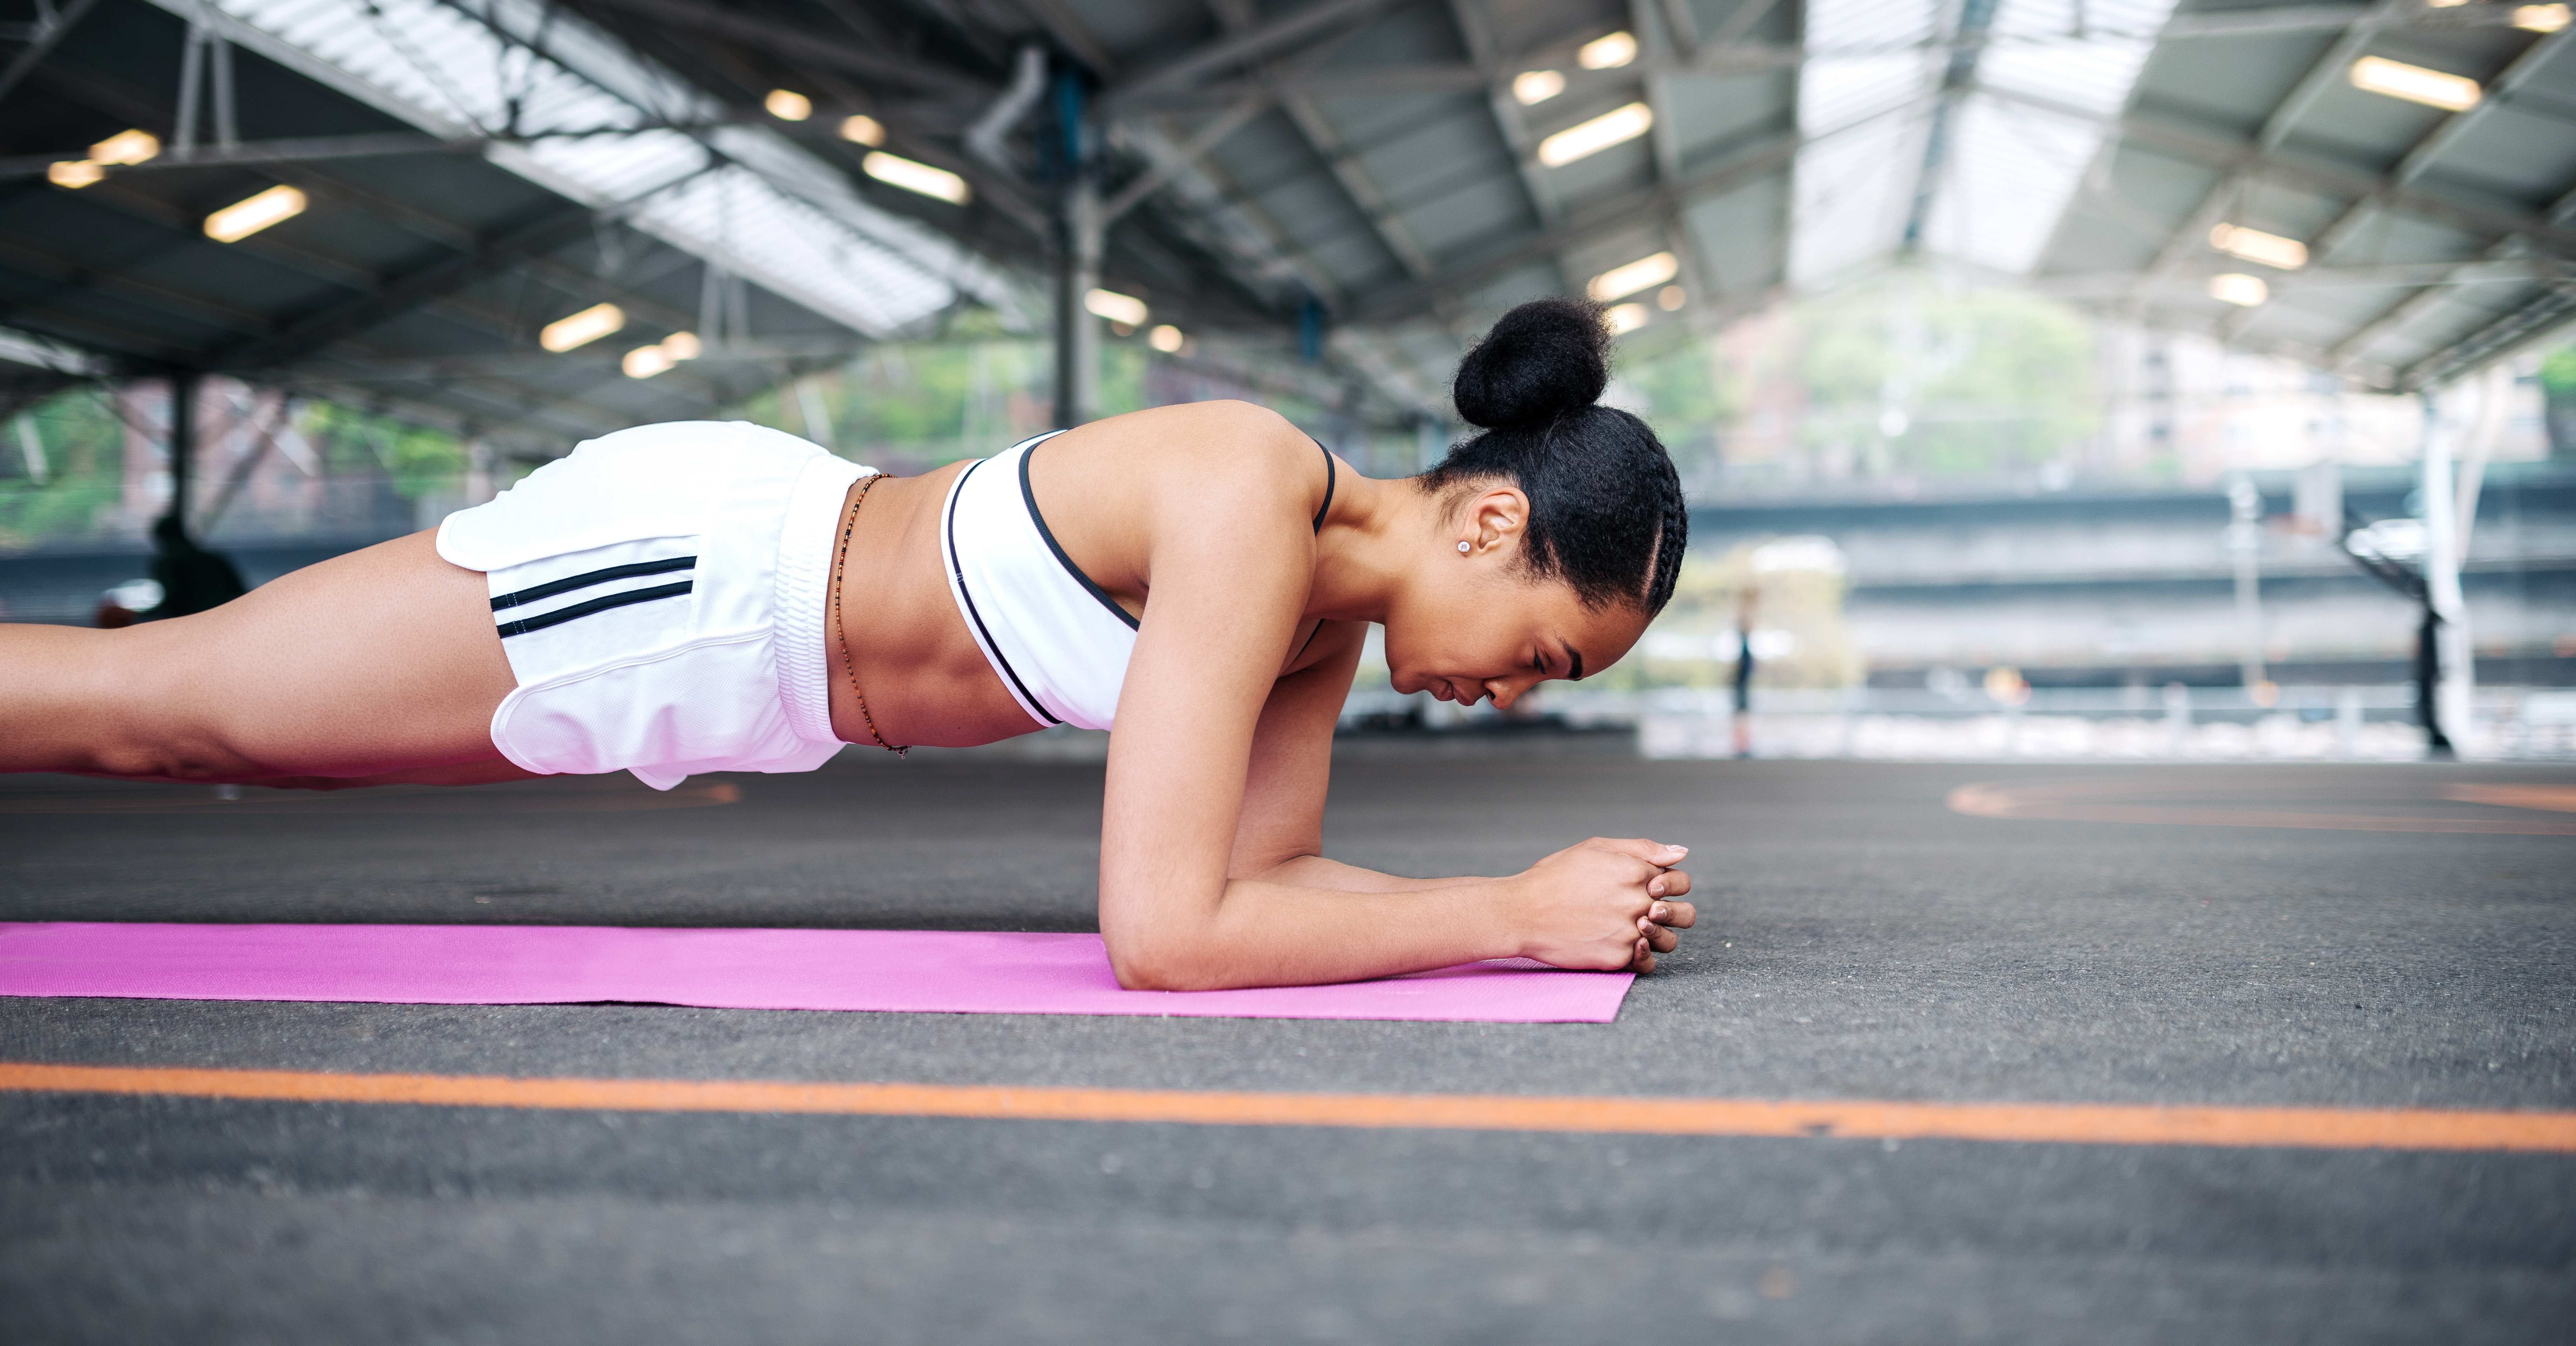 Cardio Abs Workout to Burn Calories and Define a Stronger Core